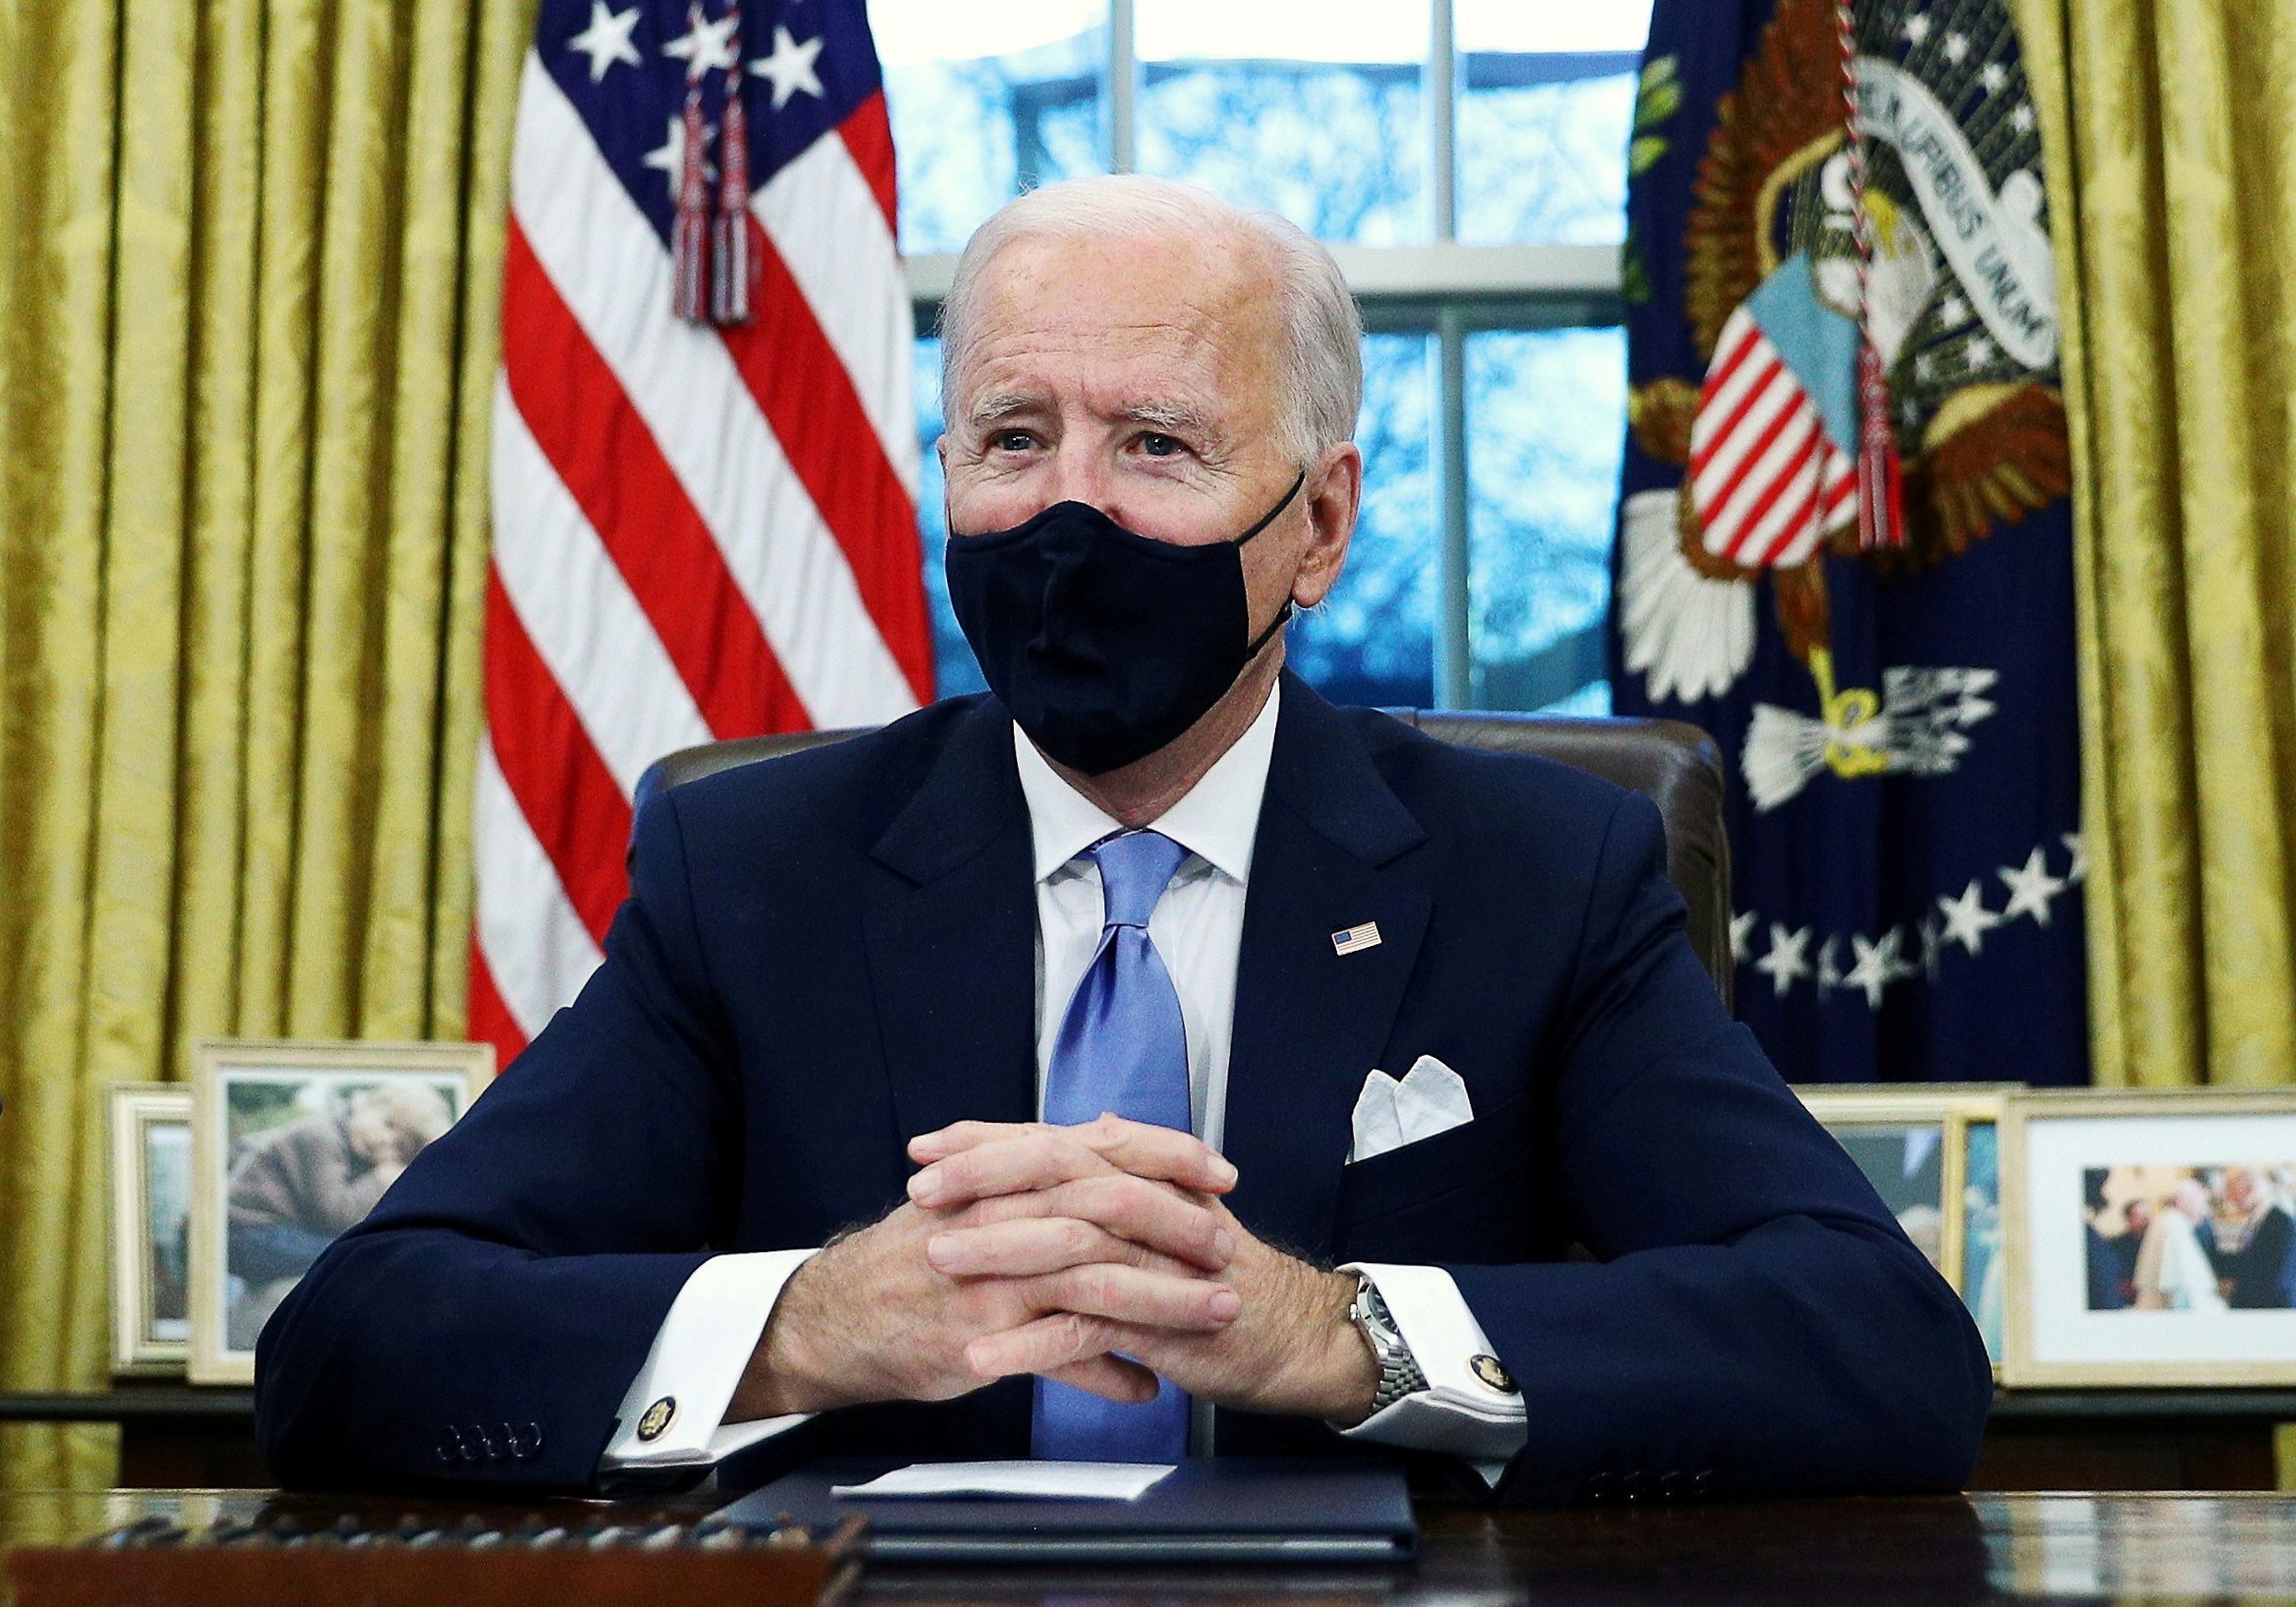 Biden launches COVID-19 initiatives on 1st full day in White House